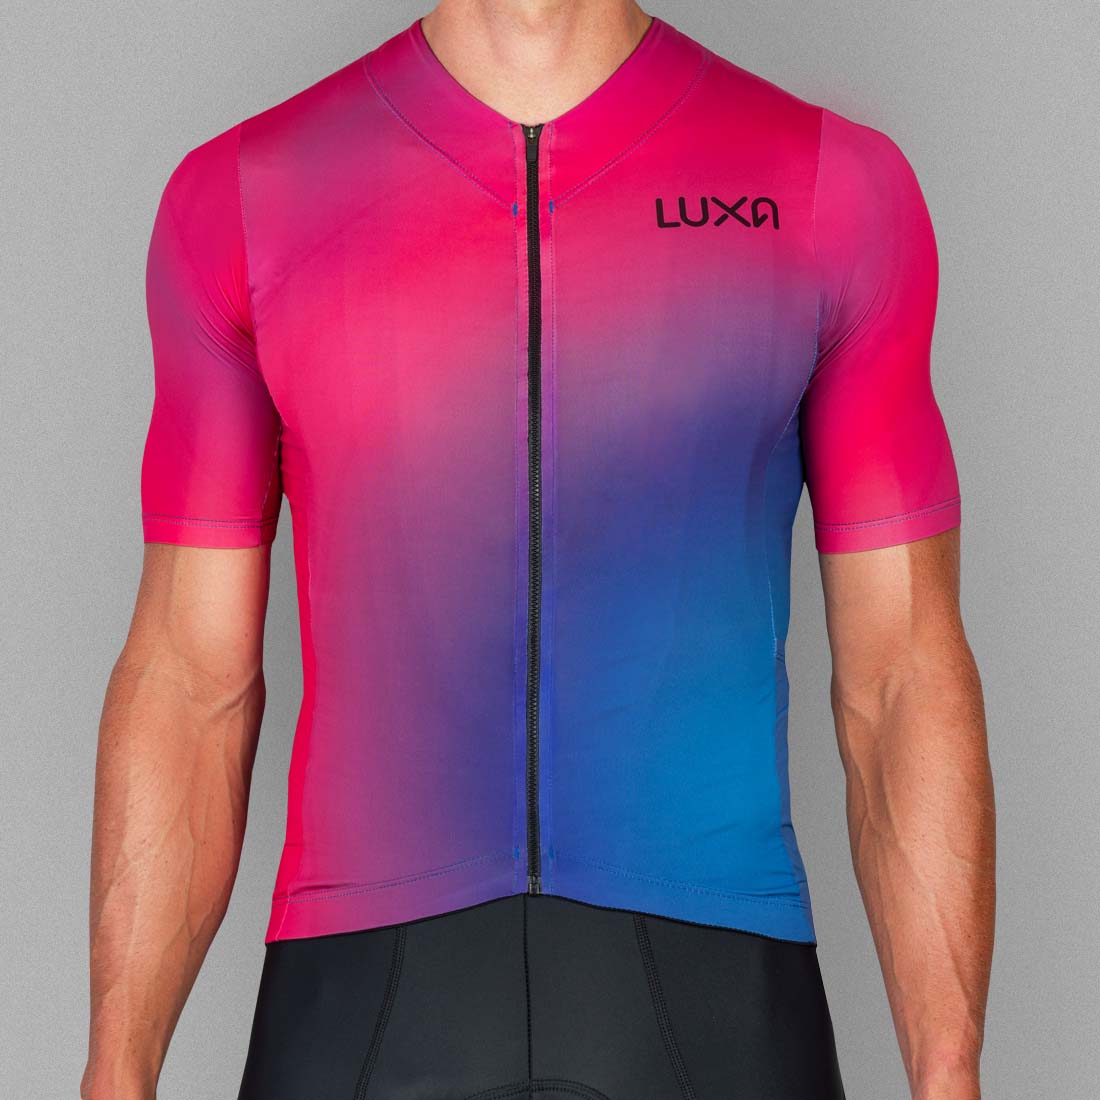 cycling base layers with silver ions - on sale now!